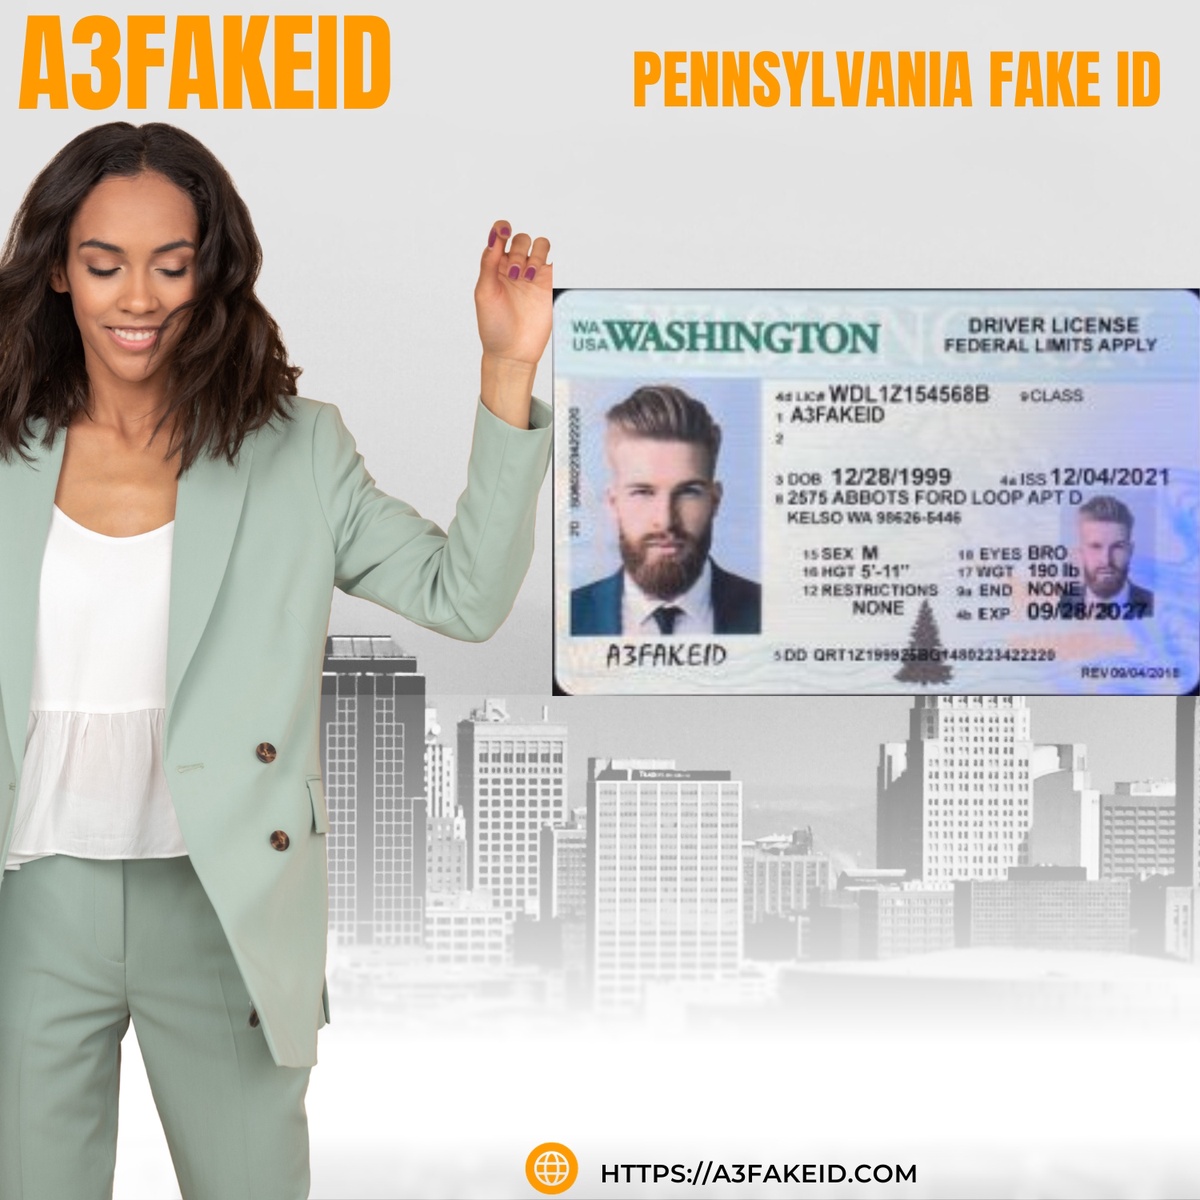 Keystone Creations: Unveiling Pennsylvania's Premier Fake IDs with Unrivaled Precision